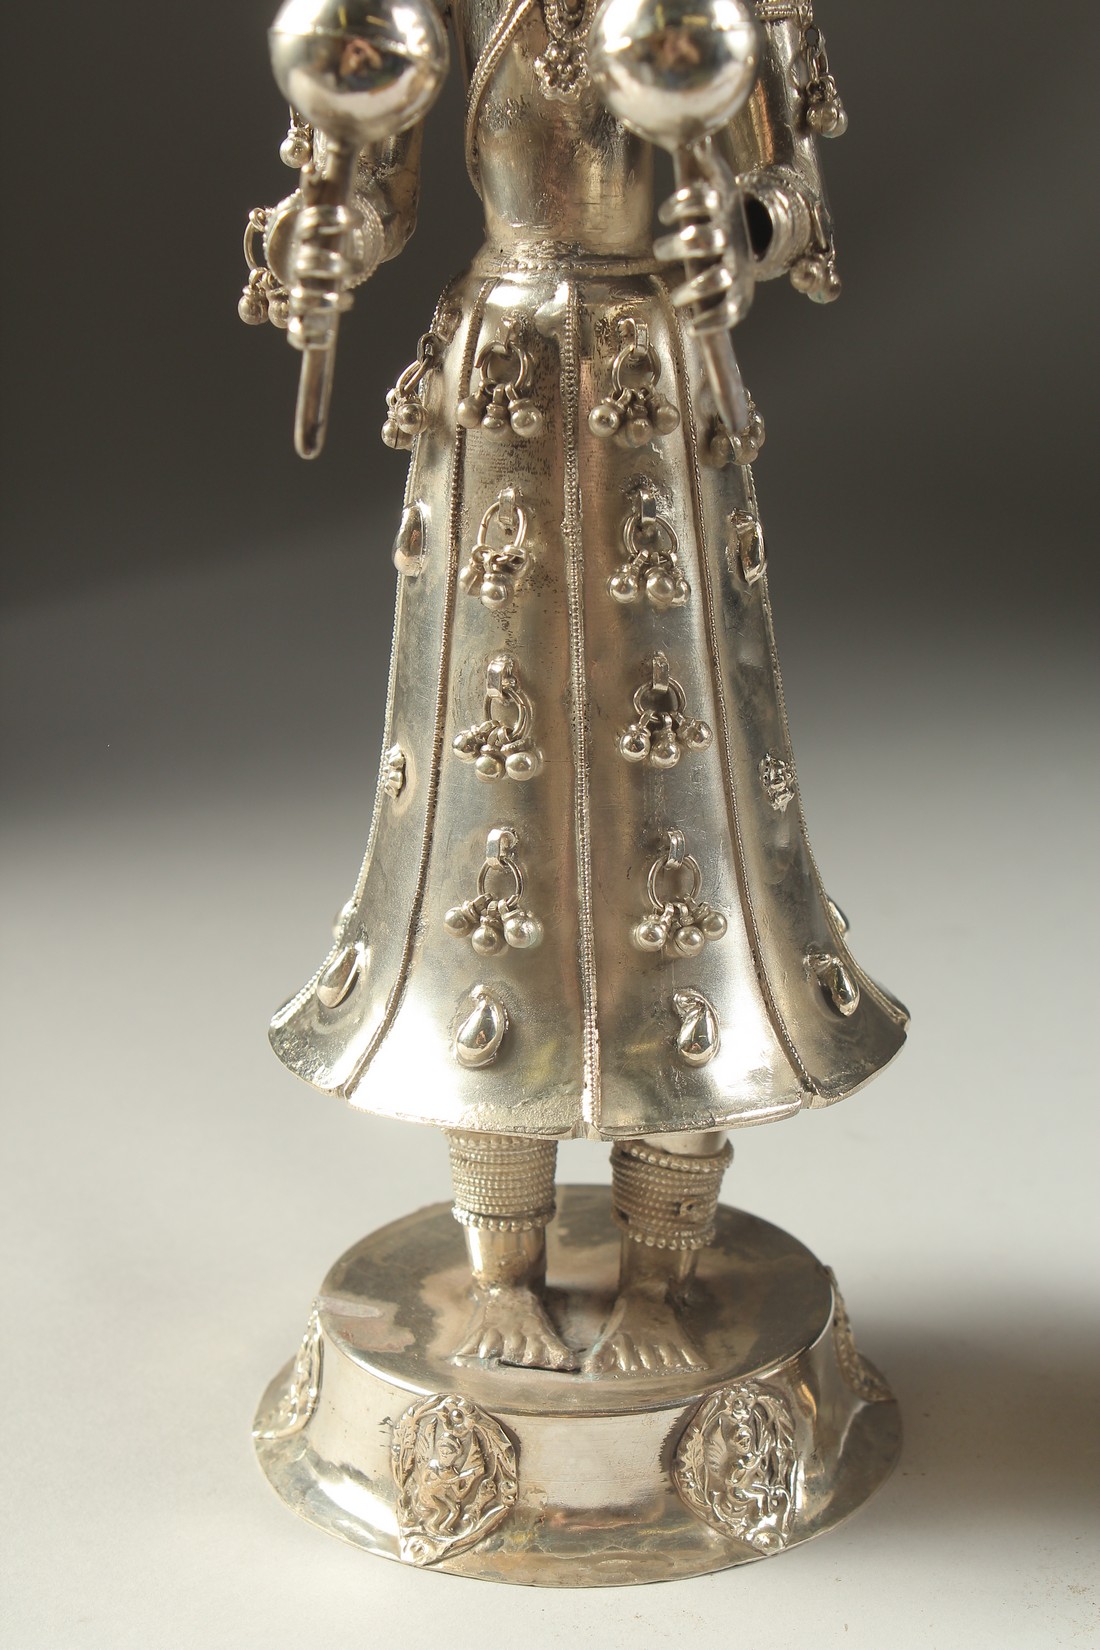 A FINE PAIR OF 19TH CENTURY INDIAN SILVER FIGURES OF MUSICIANS, 30cm high. - Image 6 of 11